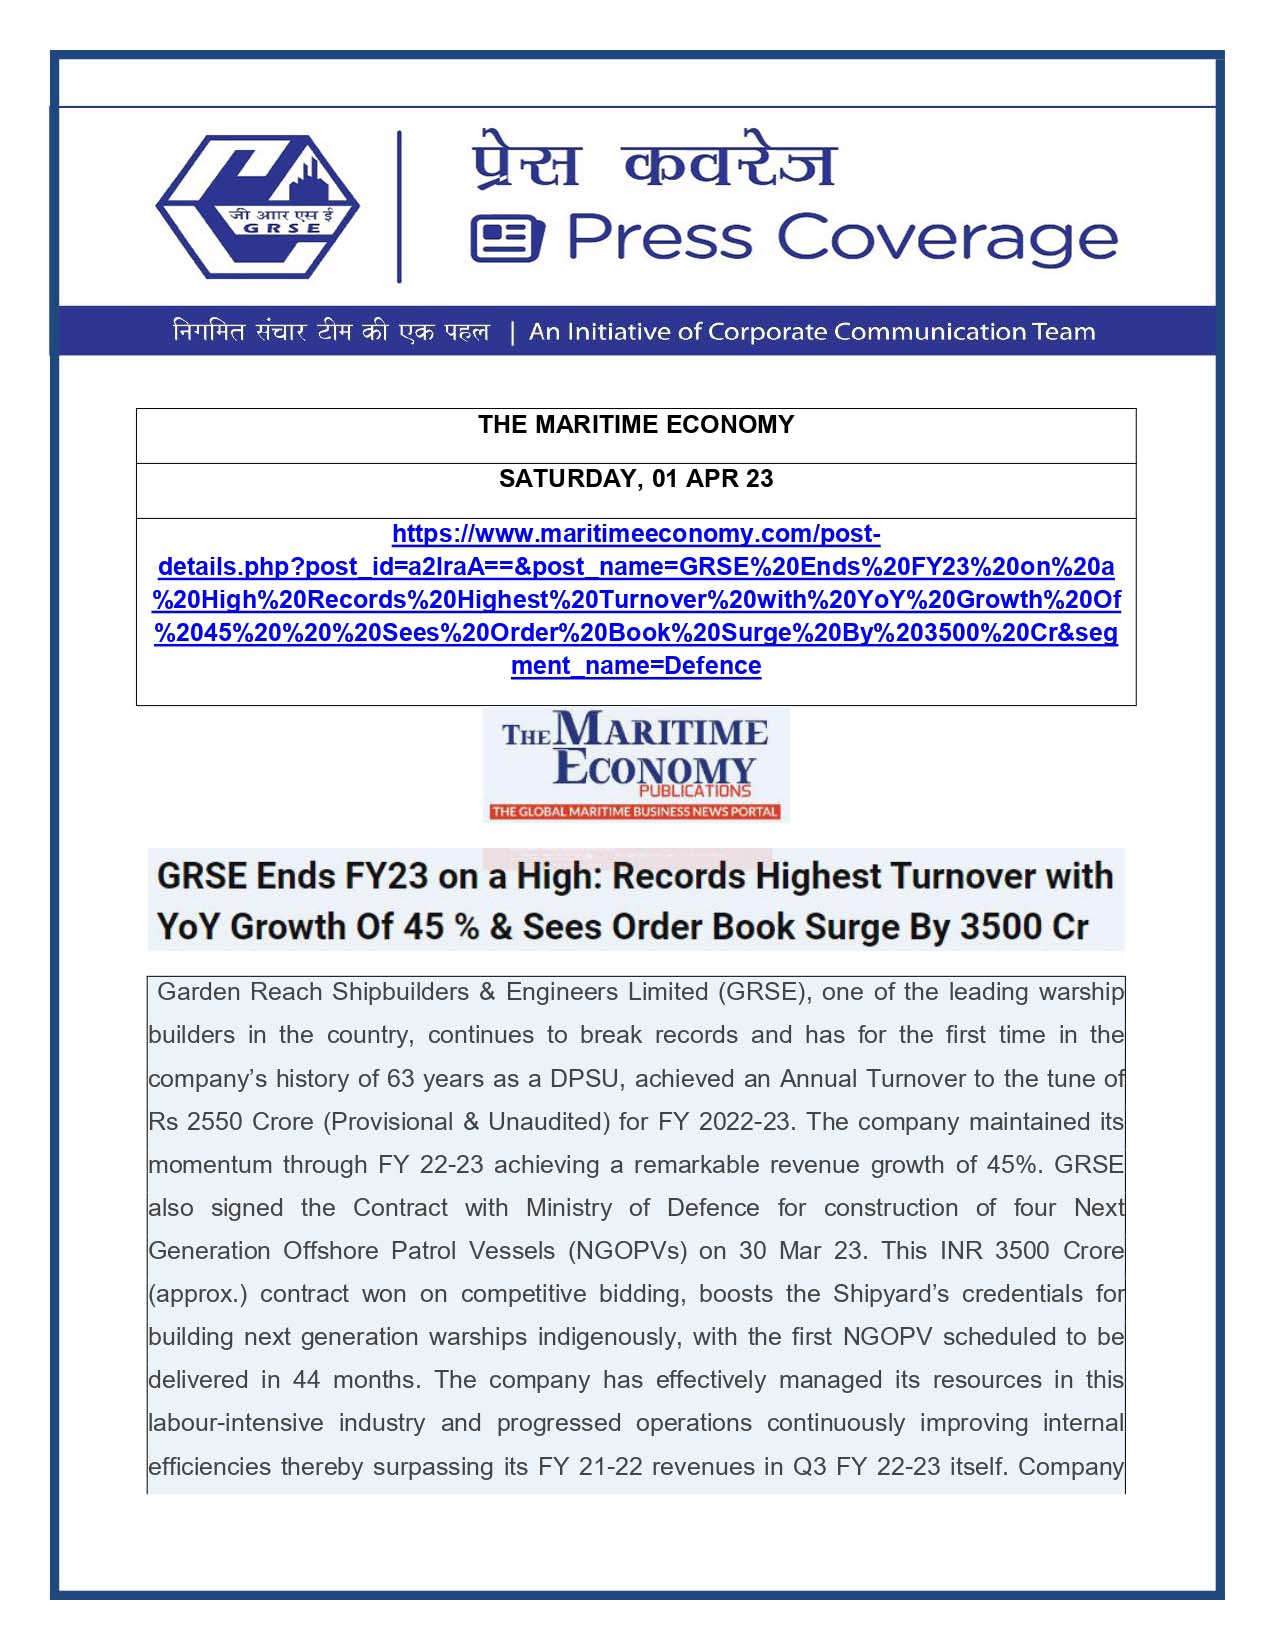 GRSE Ends FY23 on a High : Records Highest Turnover with YoY Growth of 45% & Sees Order Book Surge by 3500 Cr